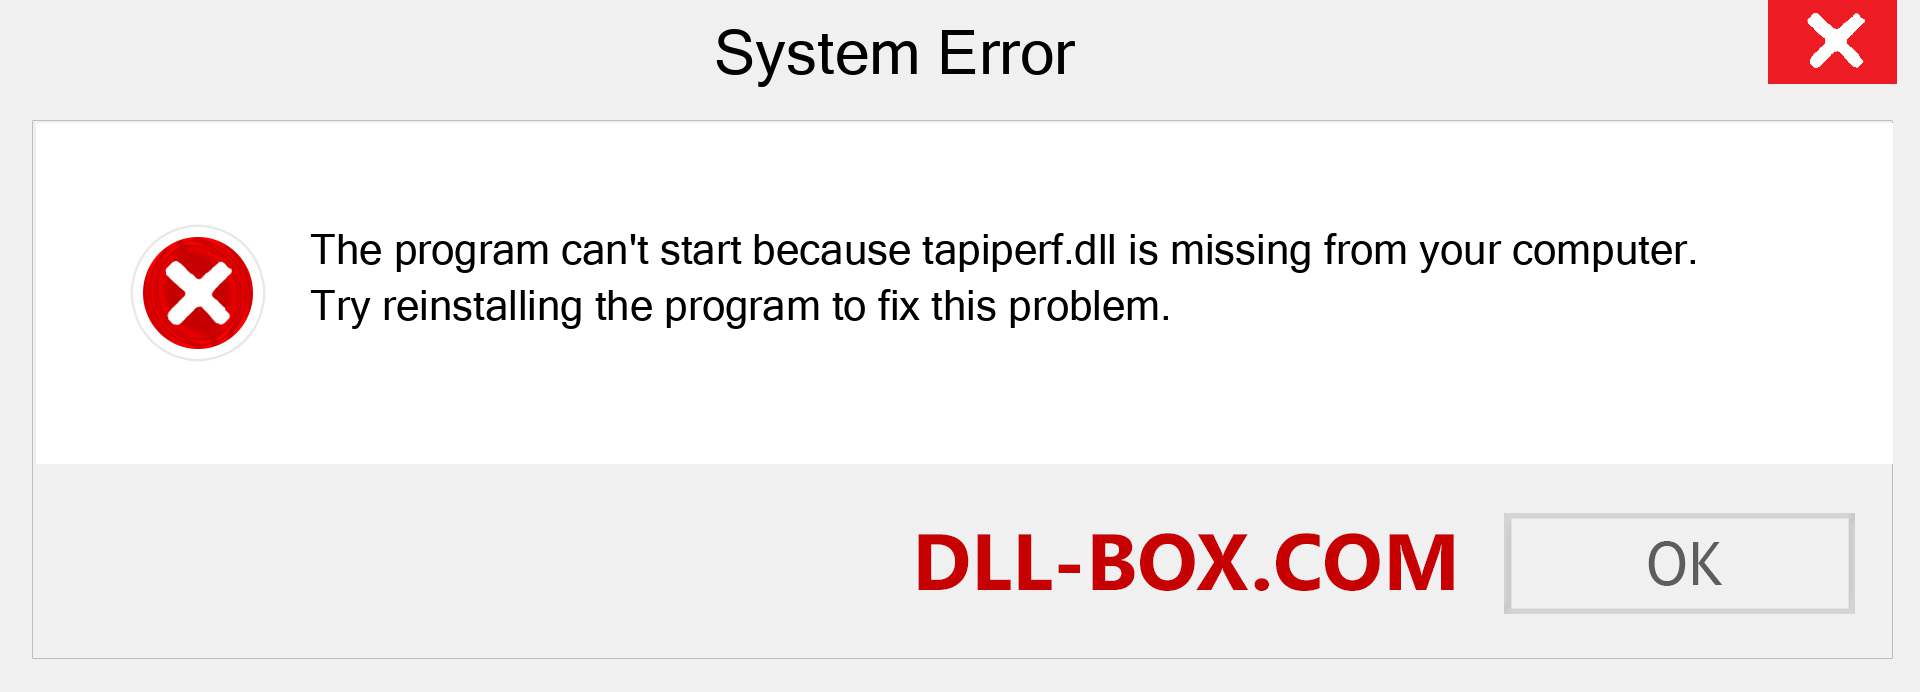  tapiperf.dll file is missing?. Download for Windows 7, 8, 10 - Fix  tapiperf dll Missing Error on Windows, photos, images